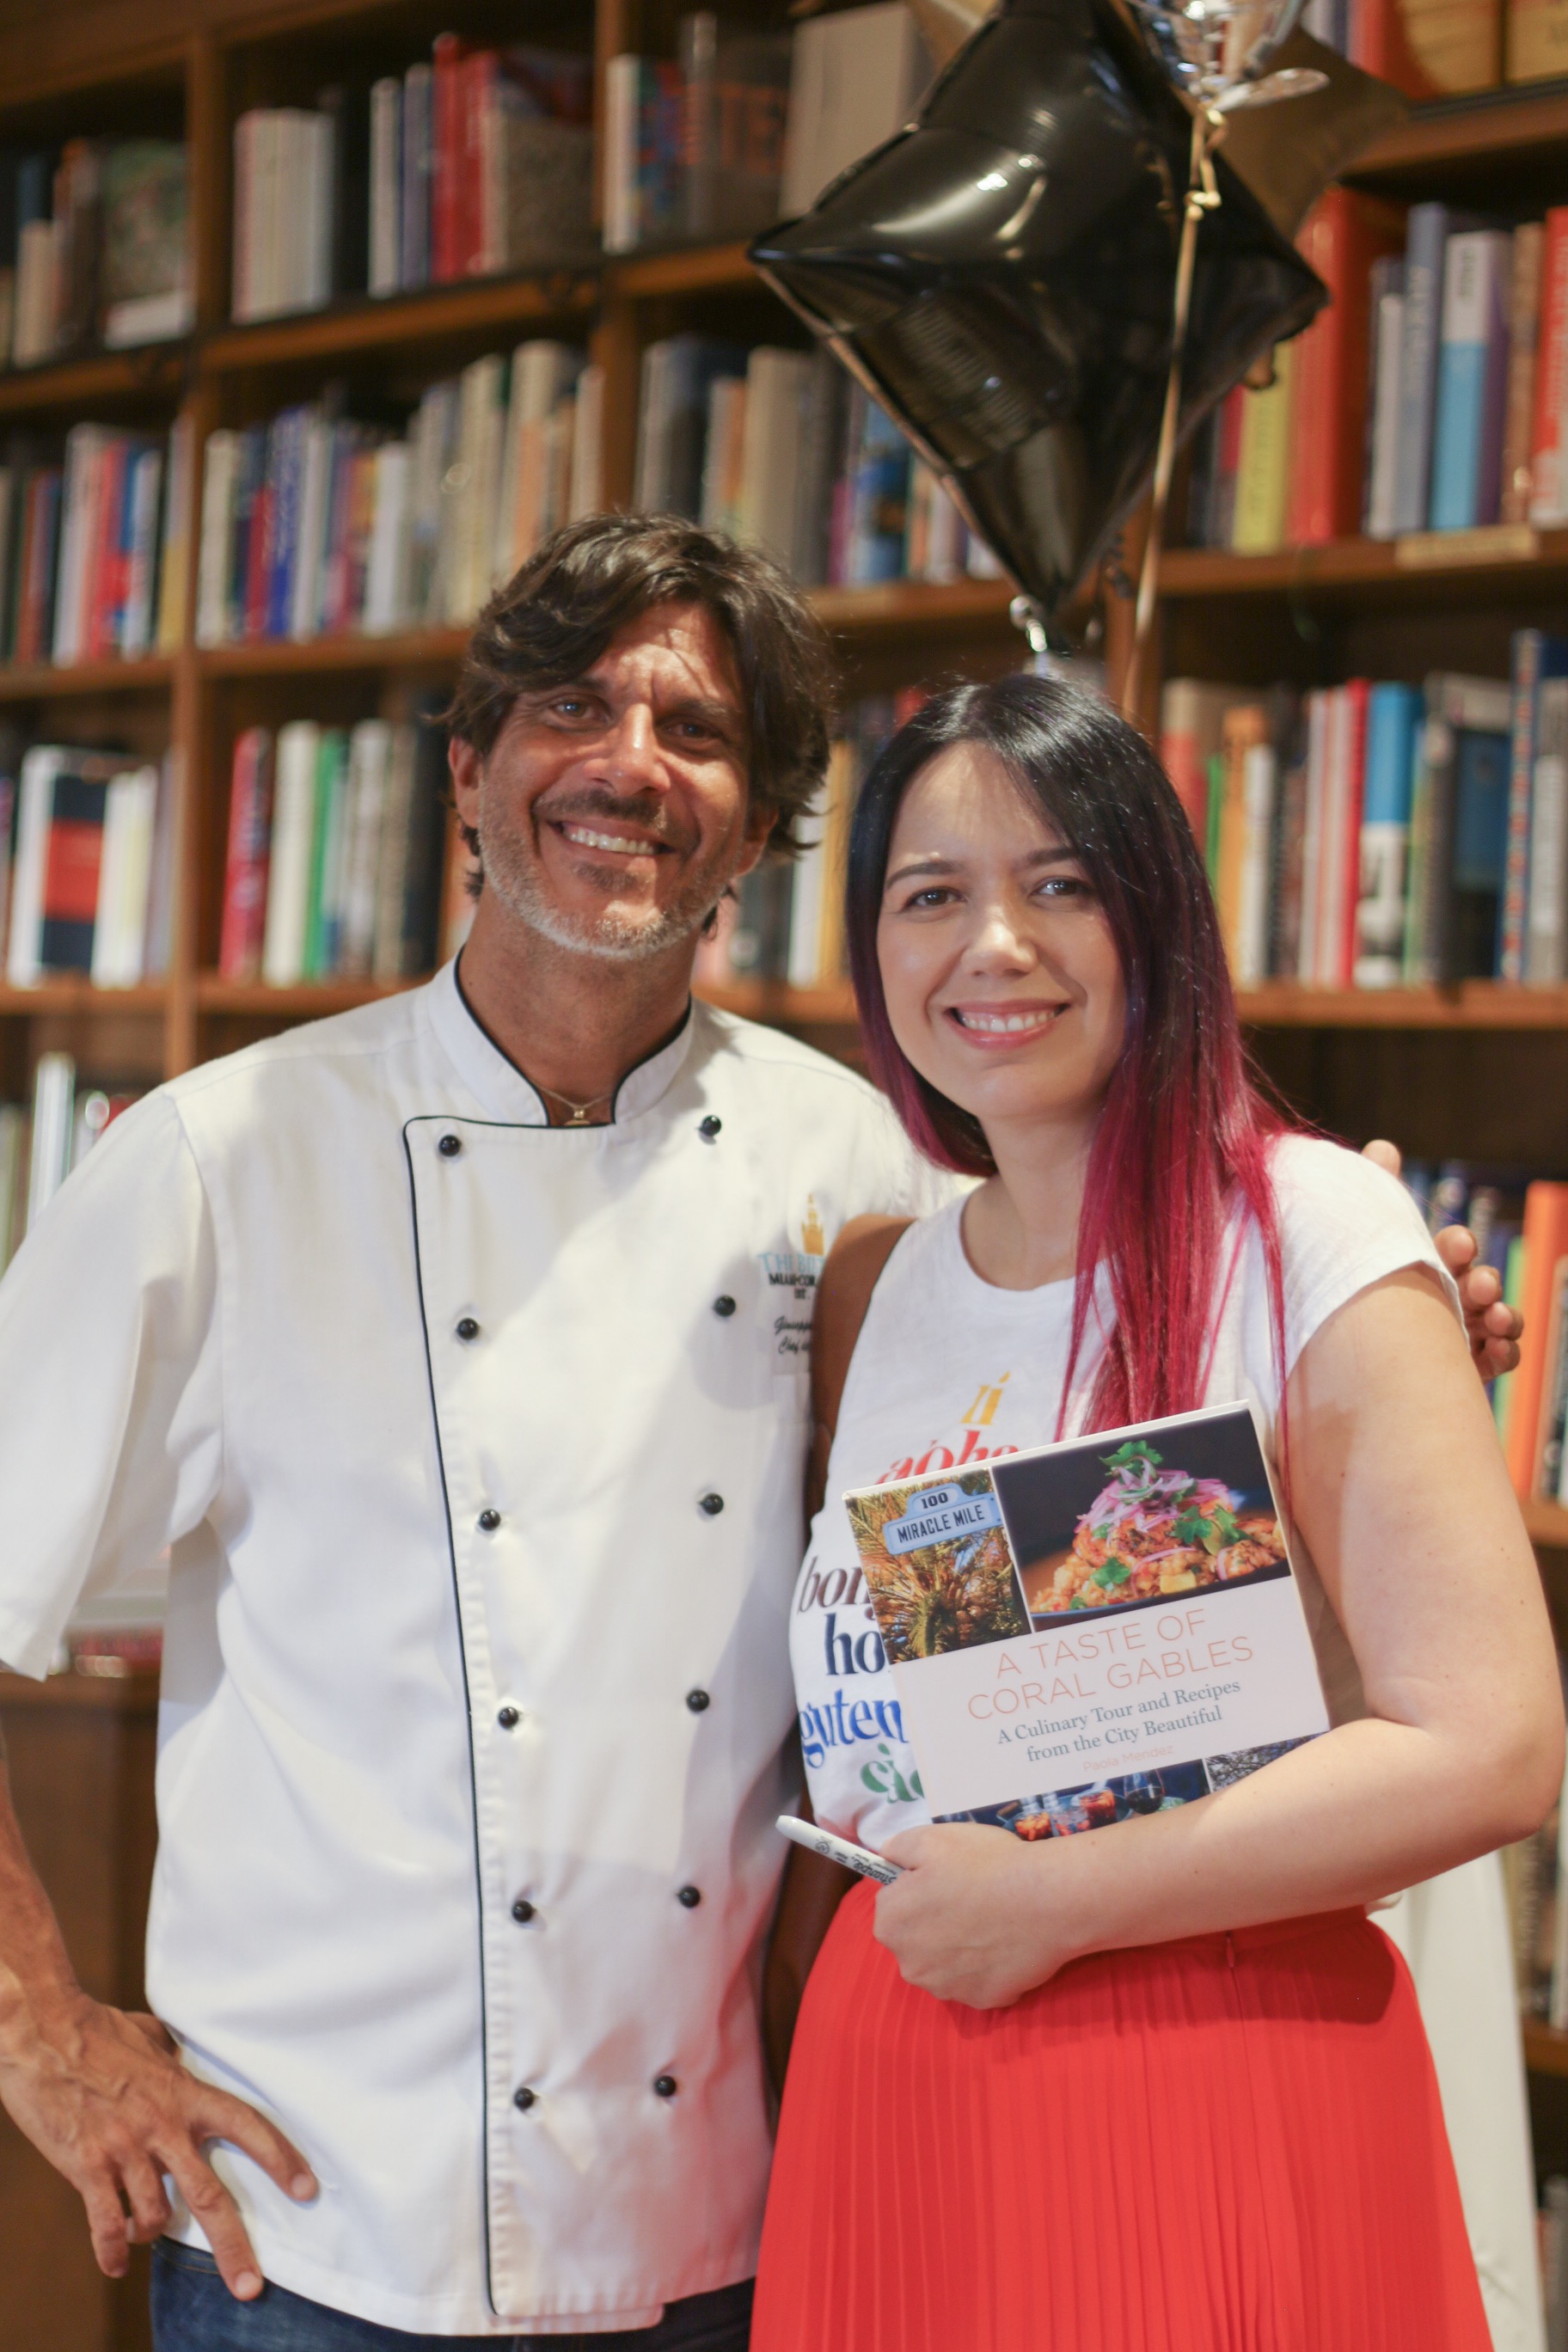 Chef Beppe from La Fontana - A Taste of Coral Gables Book Signing with Author Paola Mendez founder of the blog Coral Gables Love